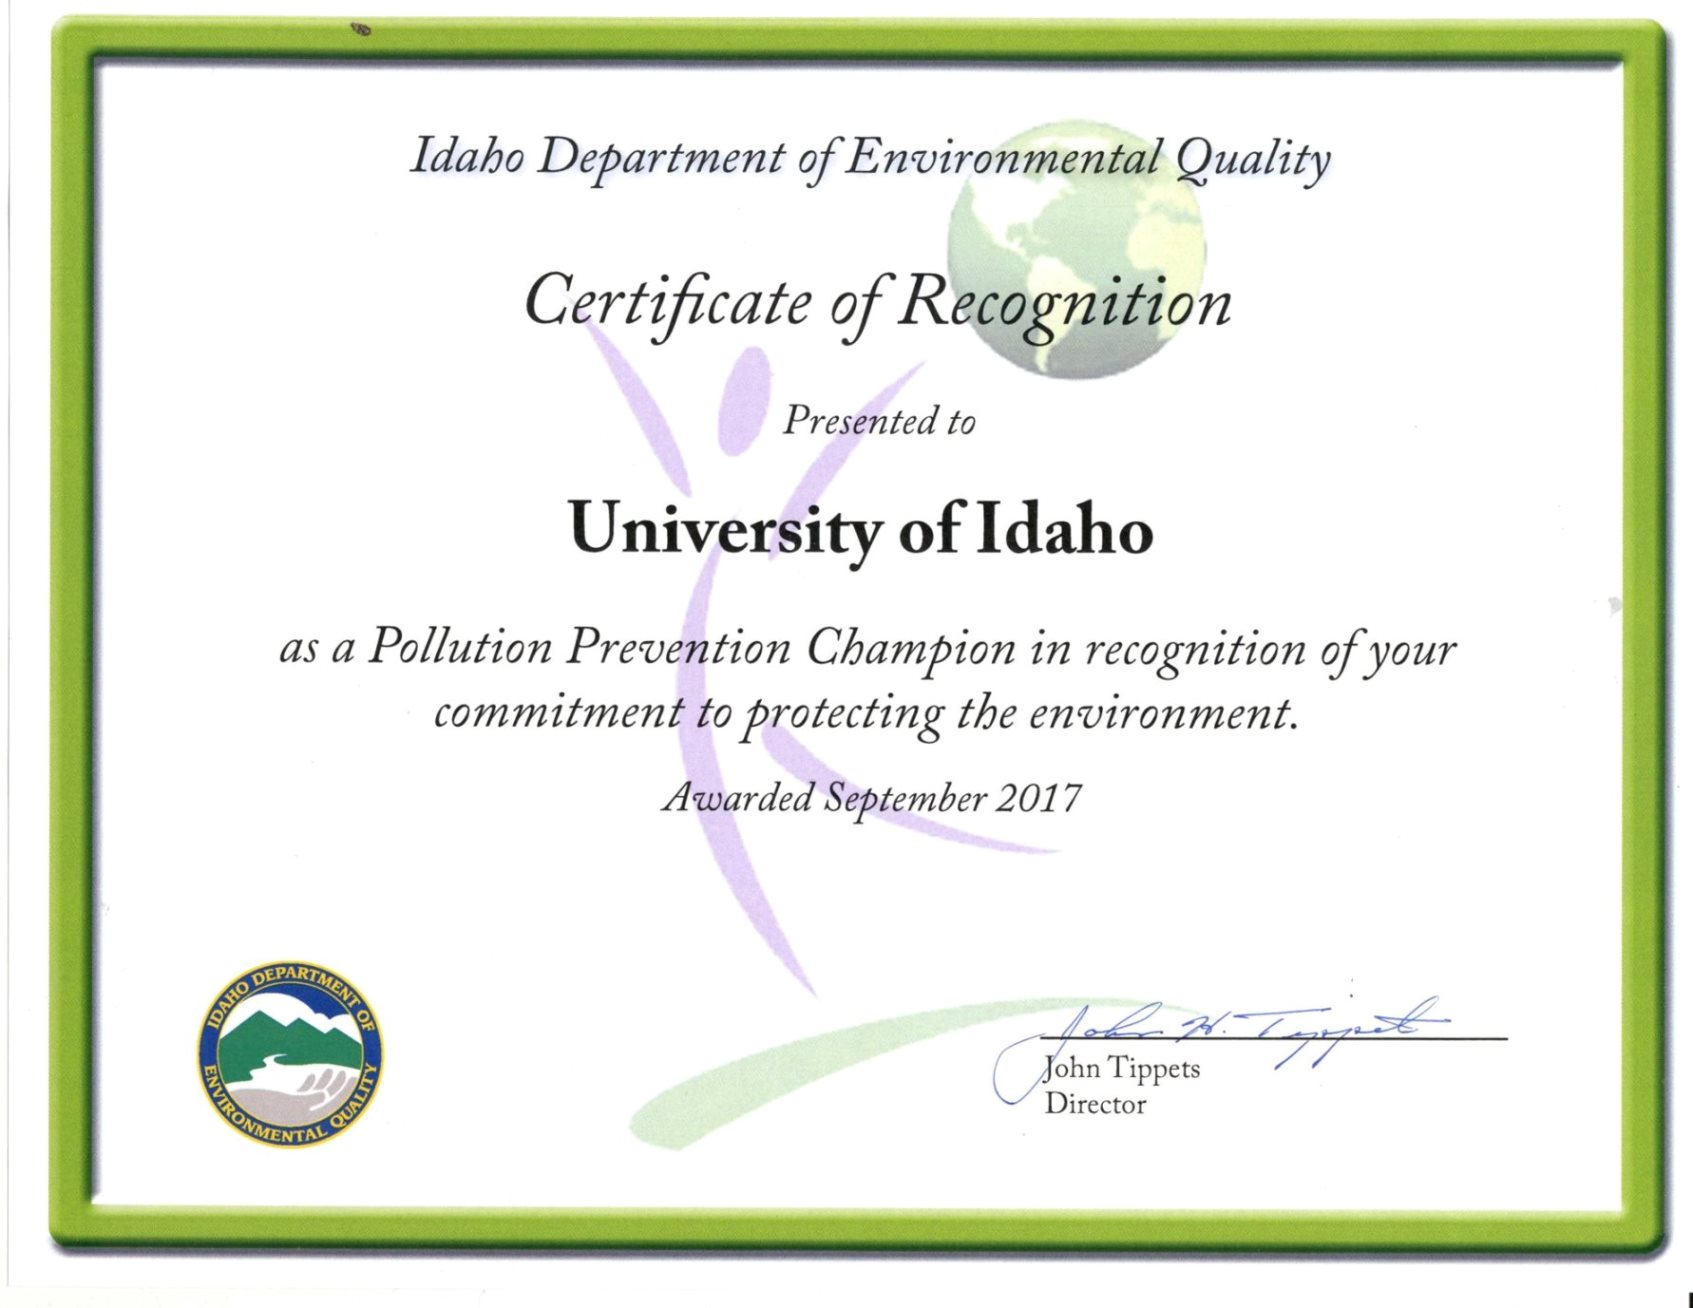 2017 Pollution Prevention Champion certificate awarded to the University of Idaho